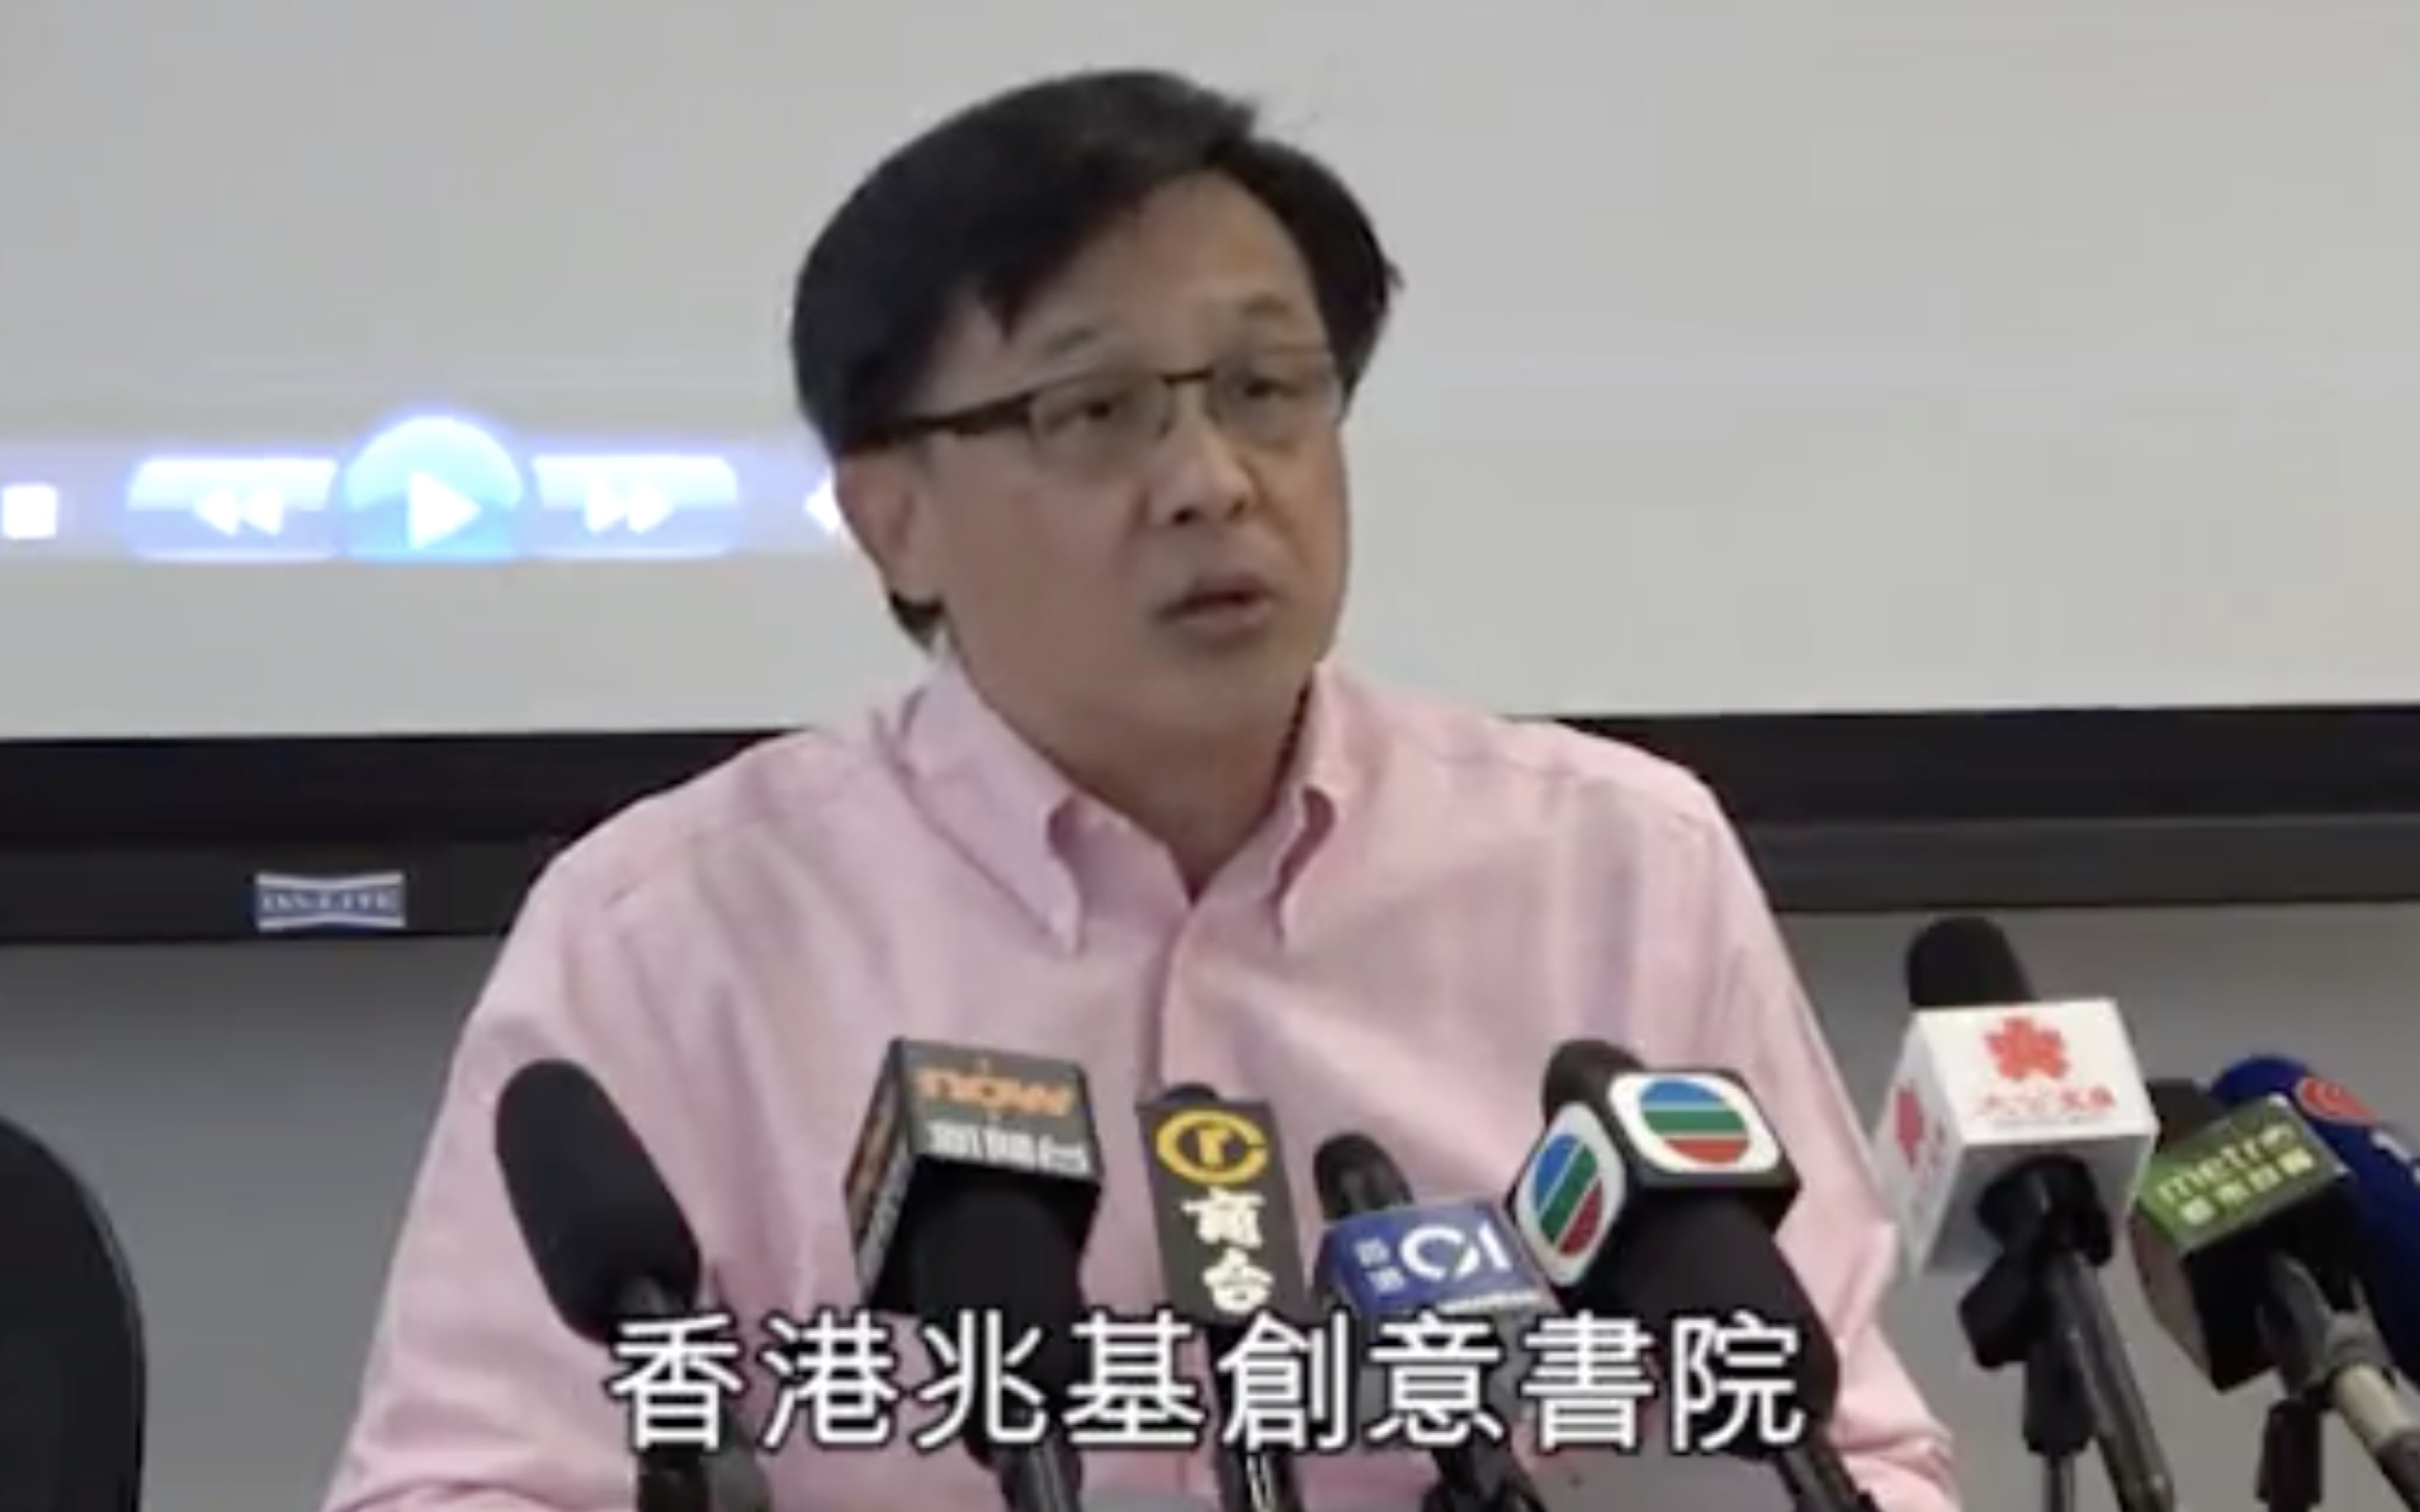 Pro-Beijing lawmaker Junius Ho names a creative arts school as showing the most serious signs of class boycott saying a lot of people wearing black shirts have been spotted walking onto campus. The school released a statement saying it’s their school uniform. Screengrab via Apple Daily video.